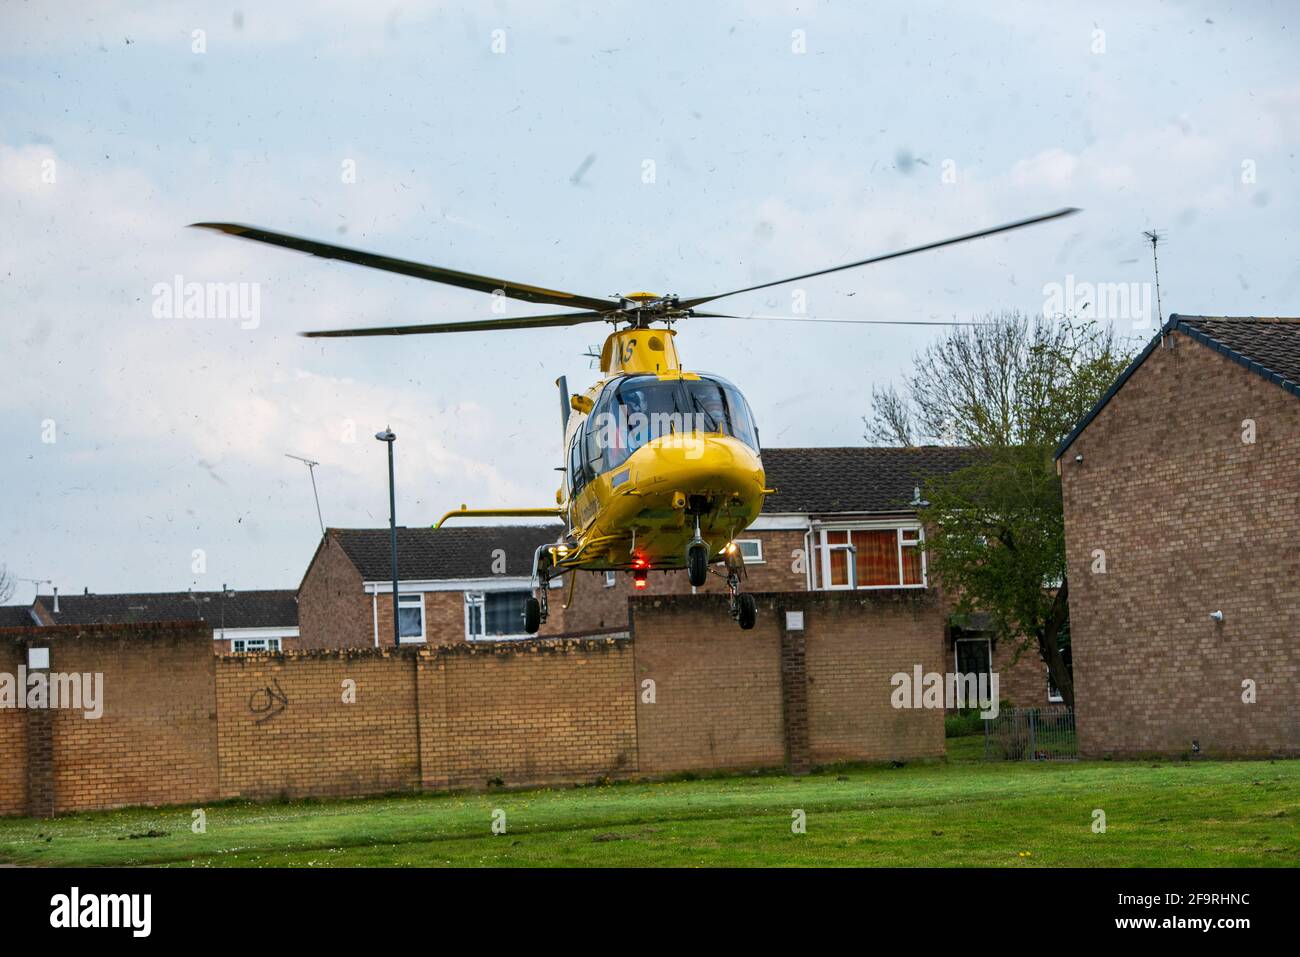 Sydenham Estate, Leamington Spa, UK. 20th April 2021: Warwickshire and Northamptonshire Air Ambulance were scrambled to a crash on the junction of Gainsborough Drive and Sydenham Drive on the Sydenham Estate of South Leamington on Tuesday afternoon. A motorcyclist was involved, and it's understood the rider was conveyed to hospital via land ambulance. Credit: Ryan Underwood / Alamy Live News Stock Photo